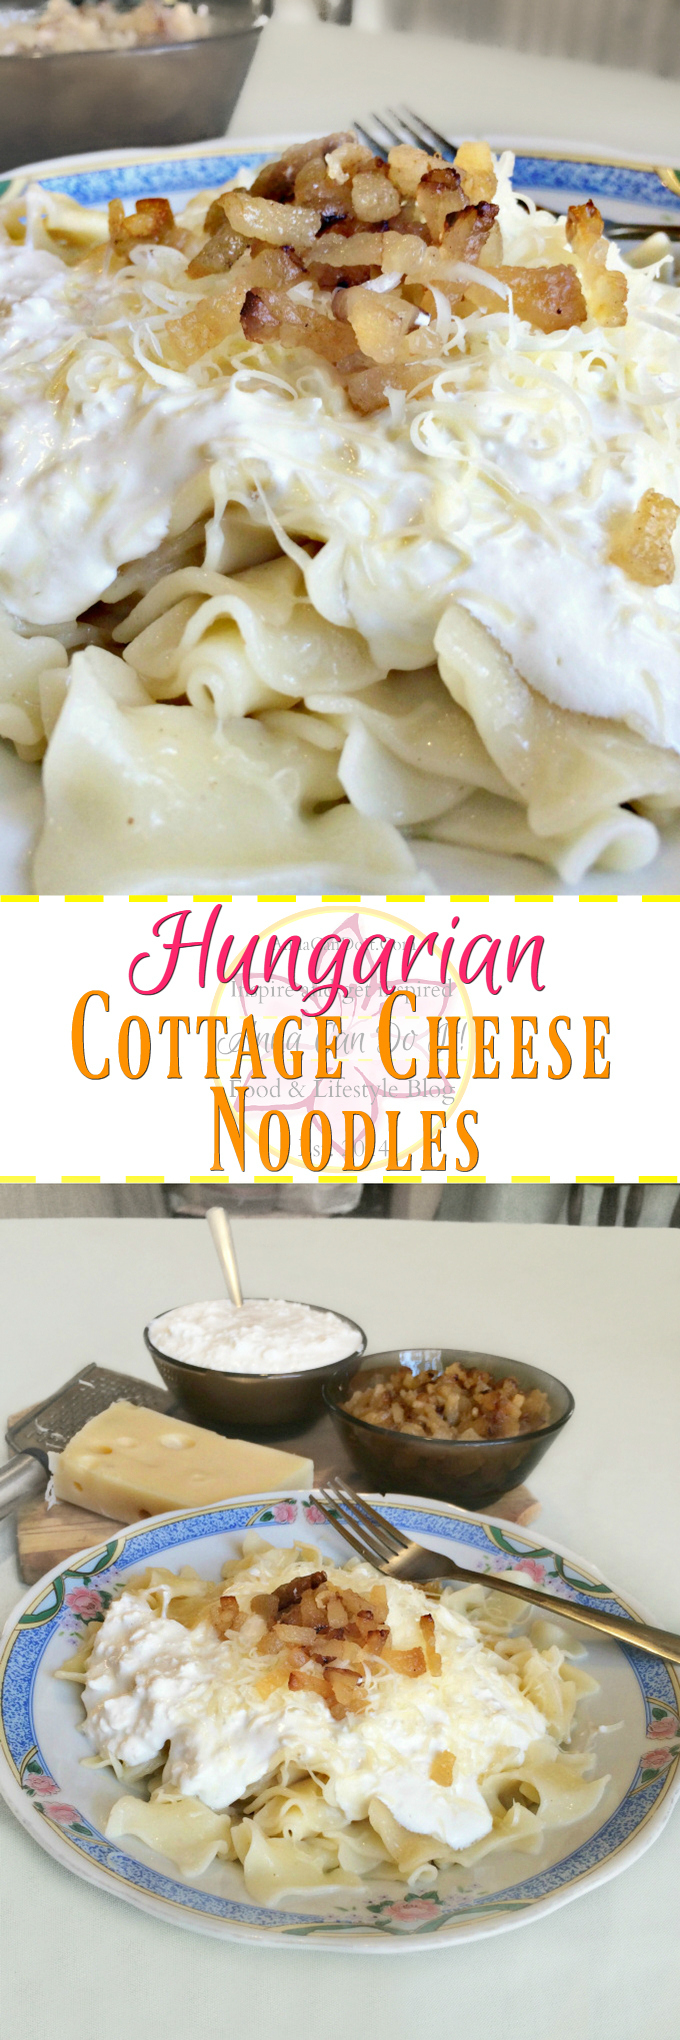 Hungarian Cottage Cheese Noodles - Anna Can Do It! -The Hungarian Cottage Cheese Noodles is a wonderful heartwarming comfort food. It's a noodle dish topped with cottage cheese, sour cream, fried bacon bits and sometimes grated cheese.